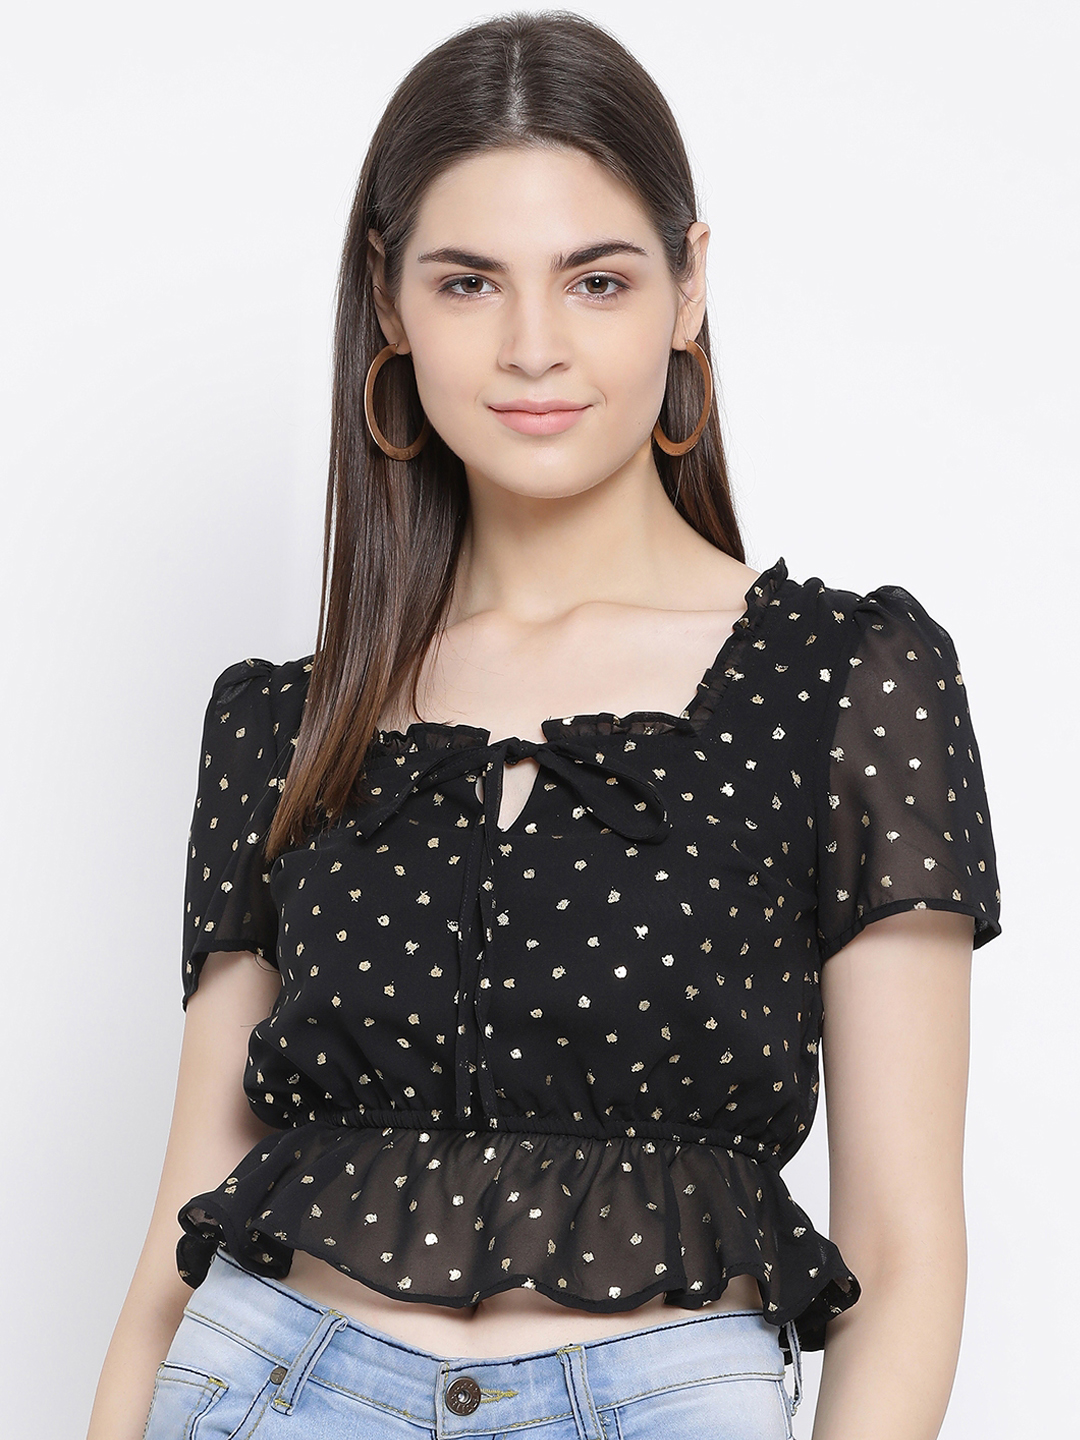 Oxolloxo Women Black Printed Cinched Waist Top Price in India